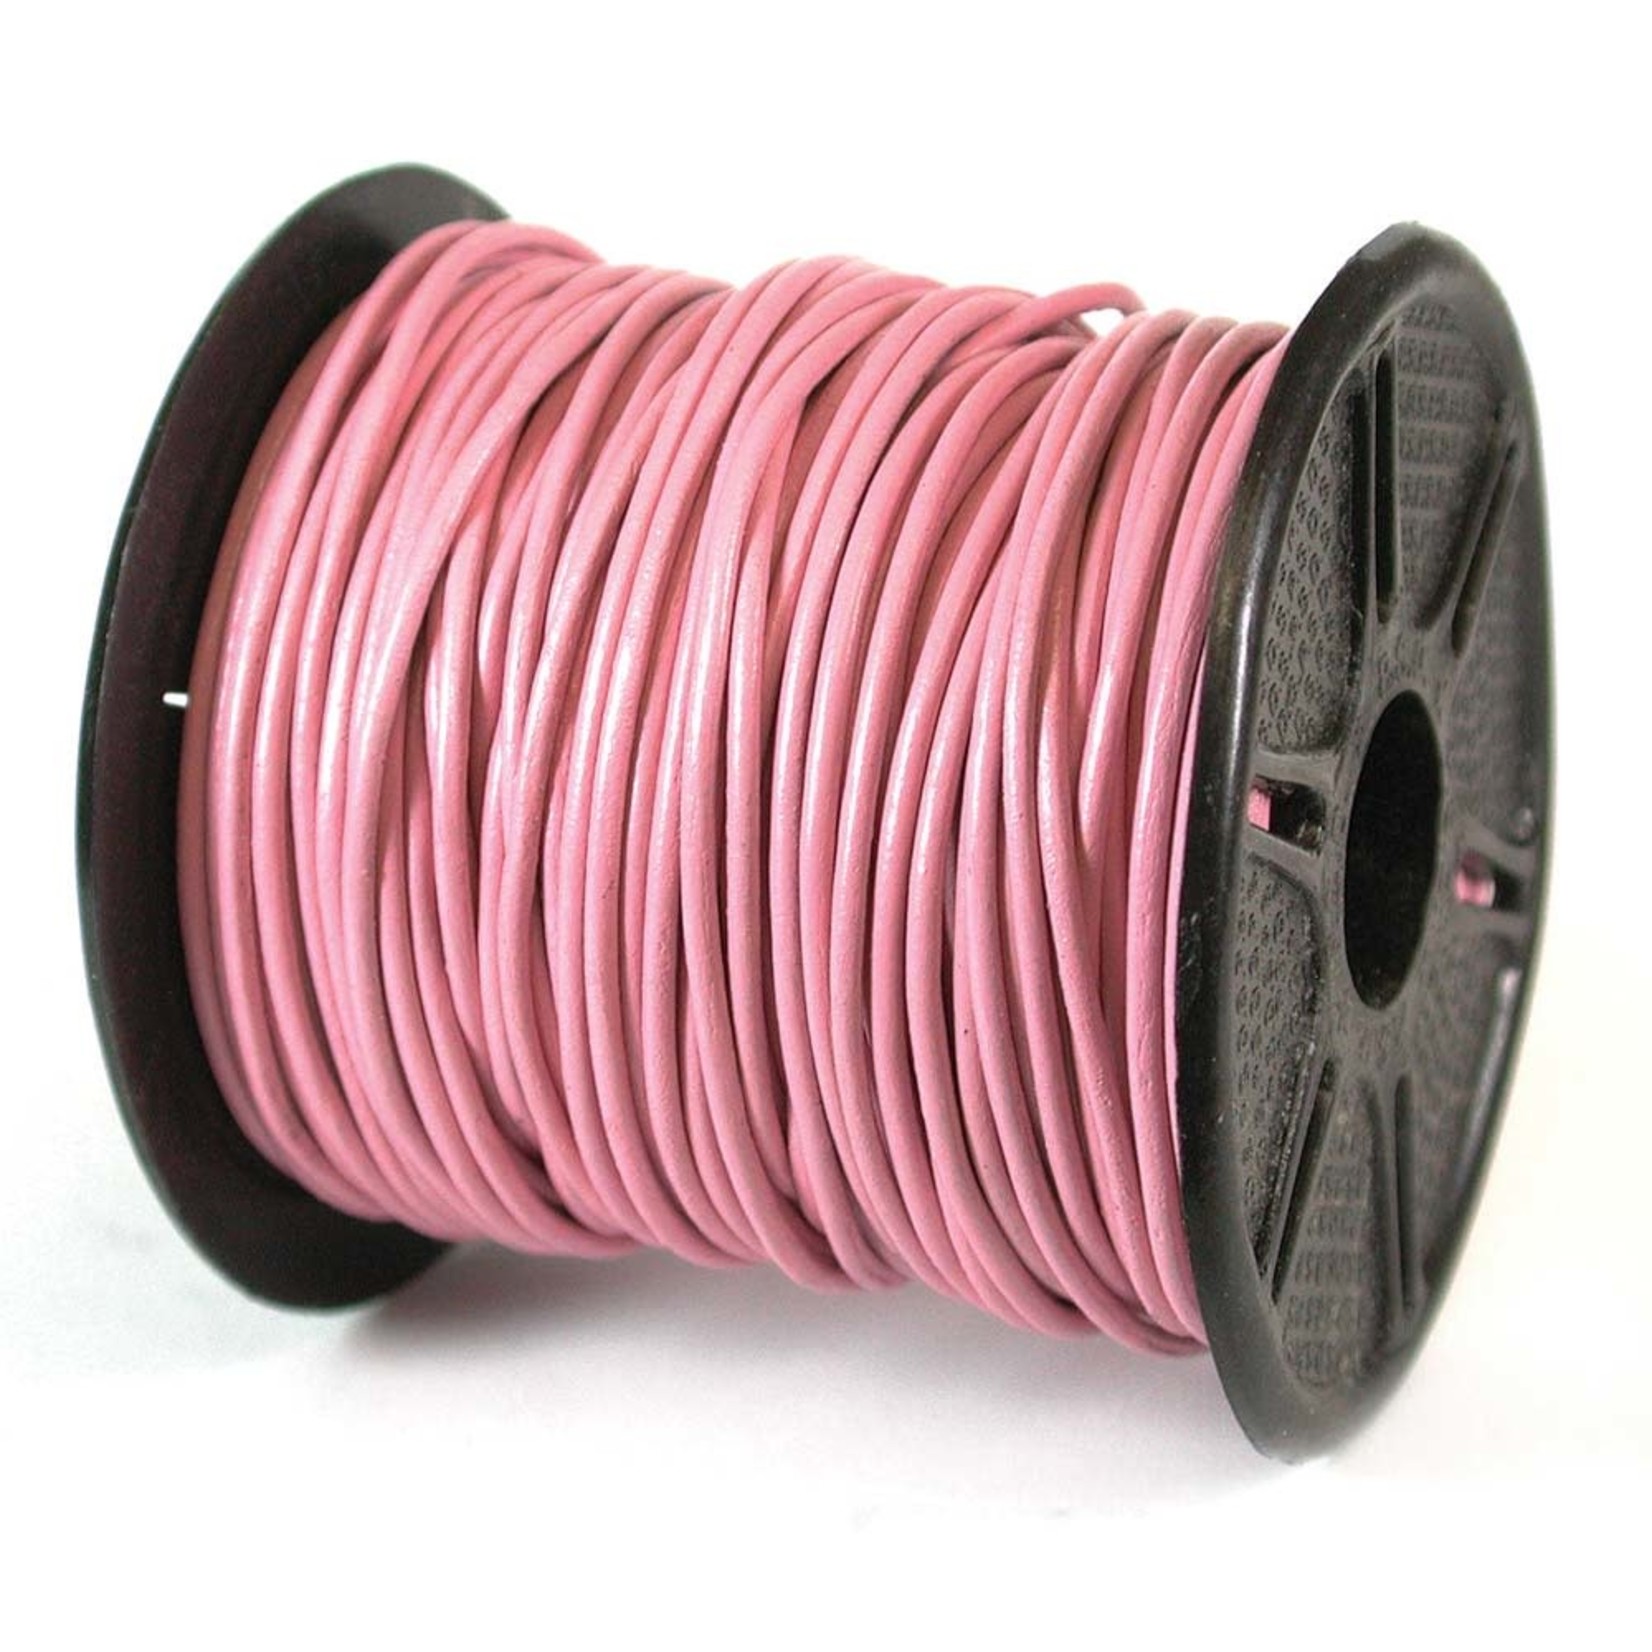 Leather 1mm Round Cord Light Pink - 1 foot